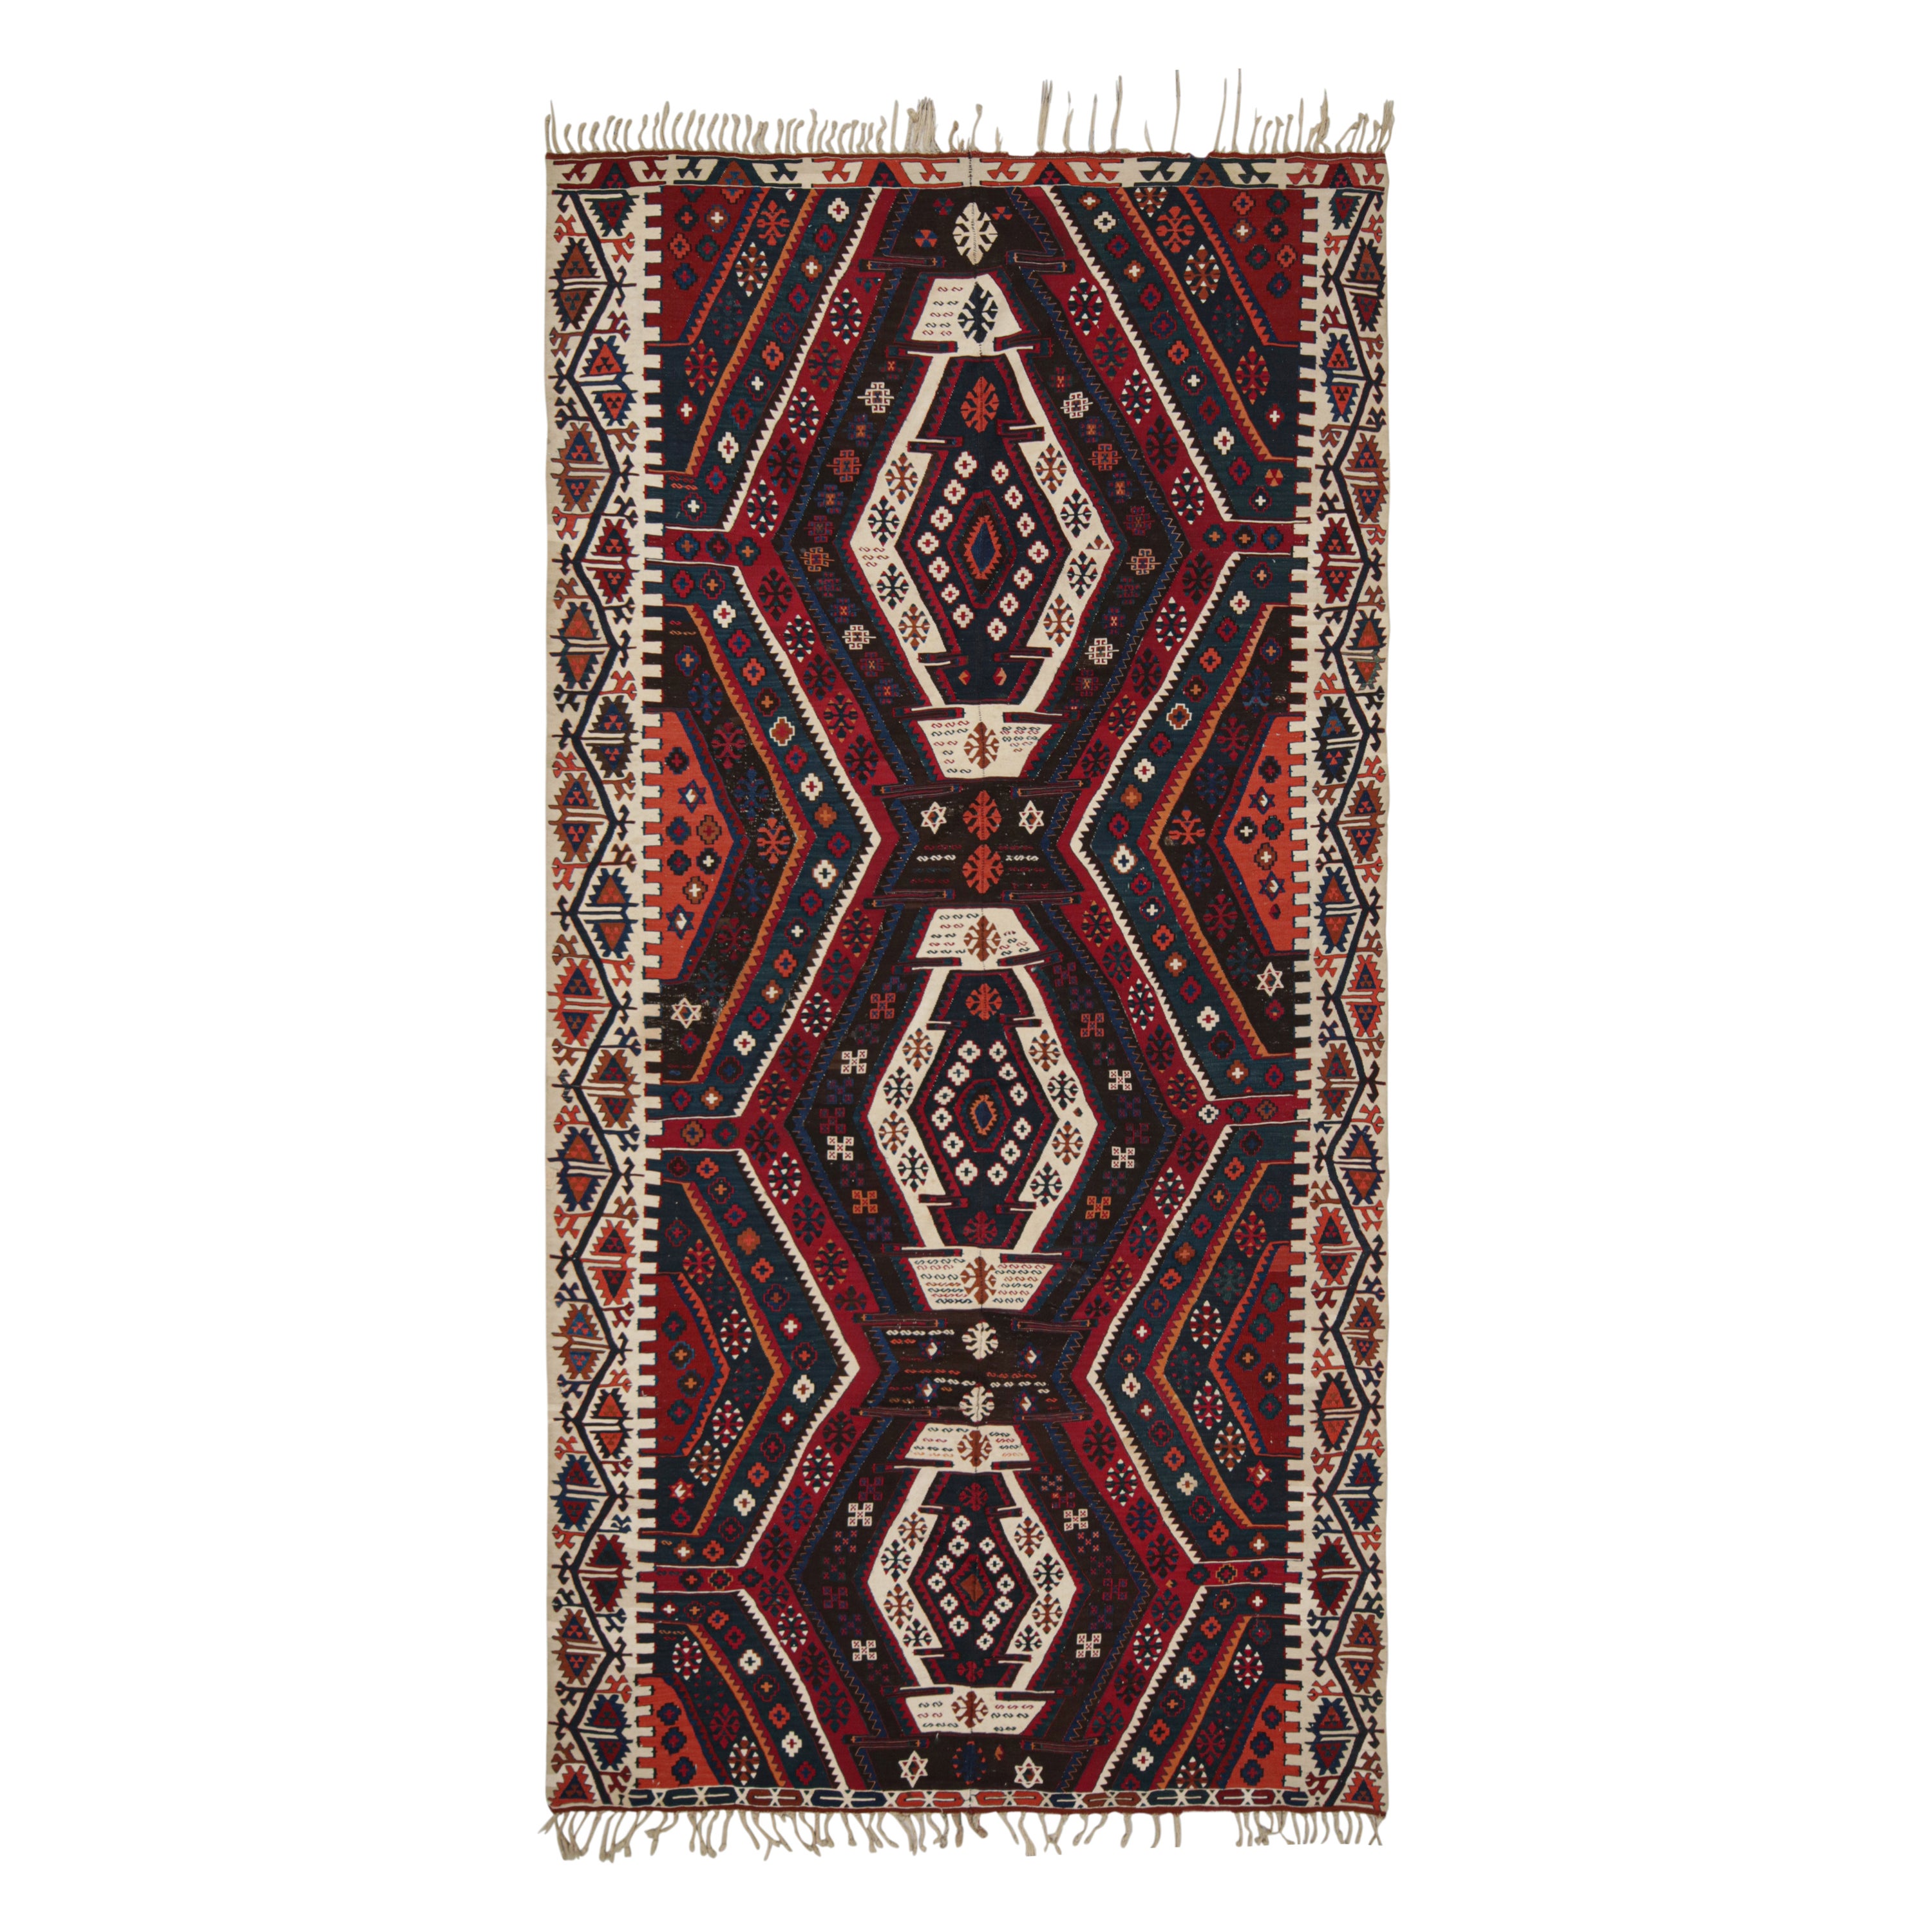 Vintage Turkish Kilim with Polychromatic Geometric Patterns, from Rug & Kilim For Sale